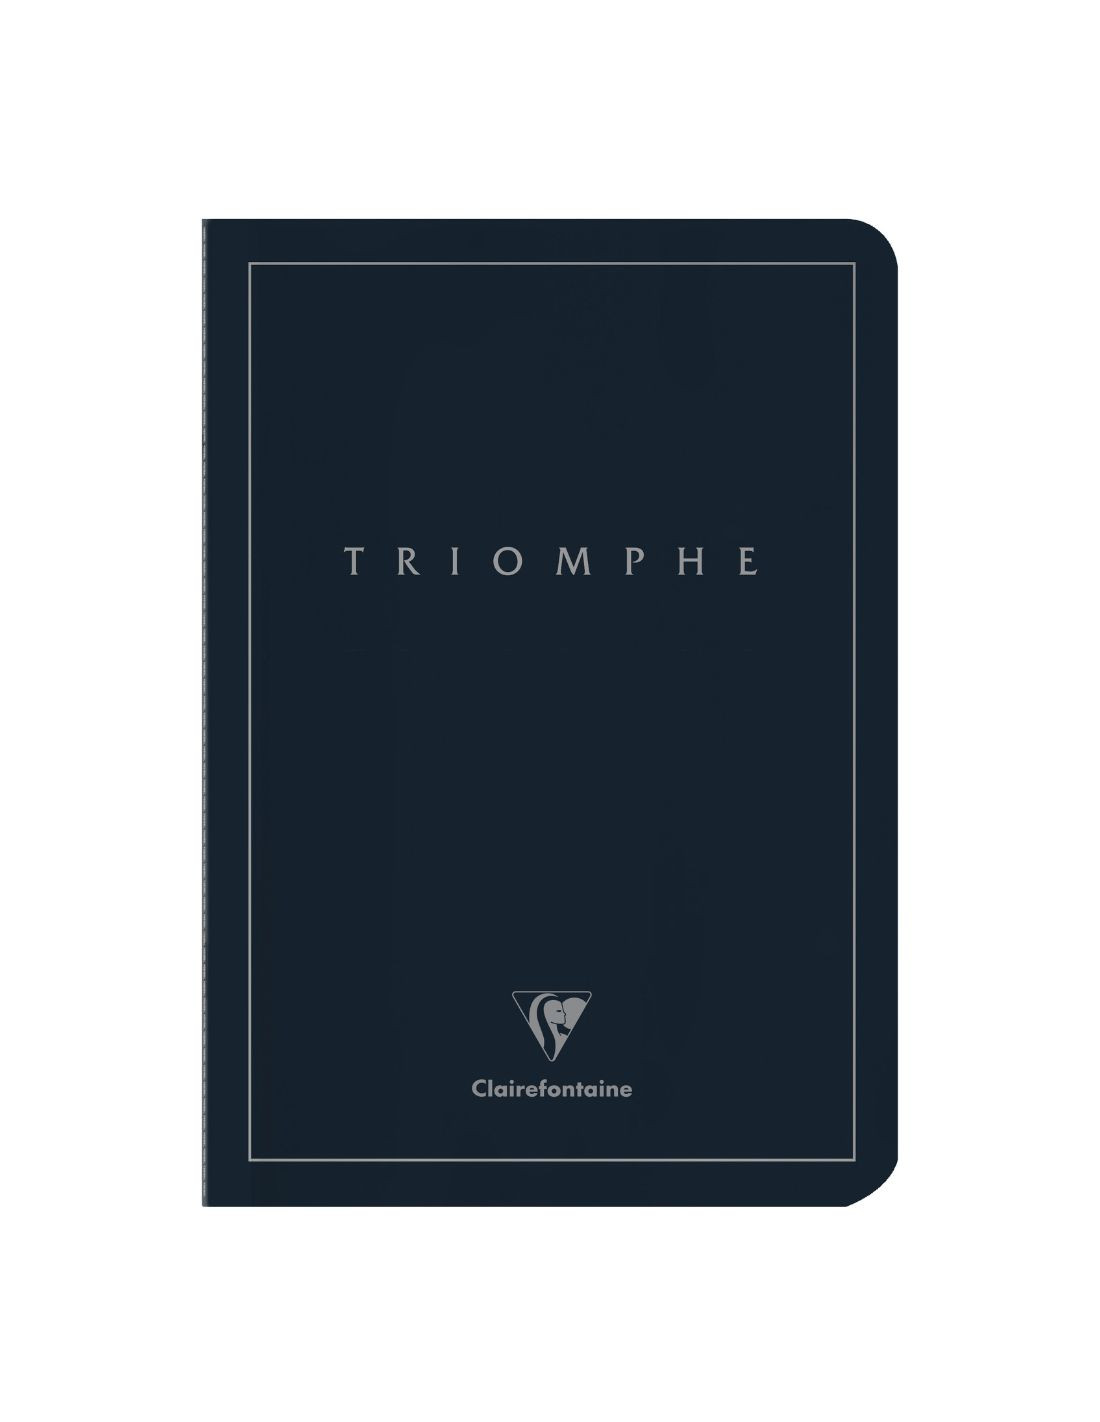 Clairefontaine Triomphe Platinum A5 Lined Notebook